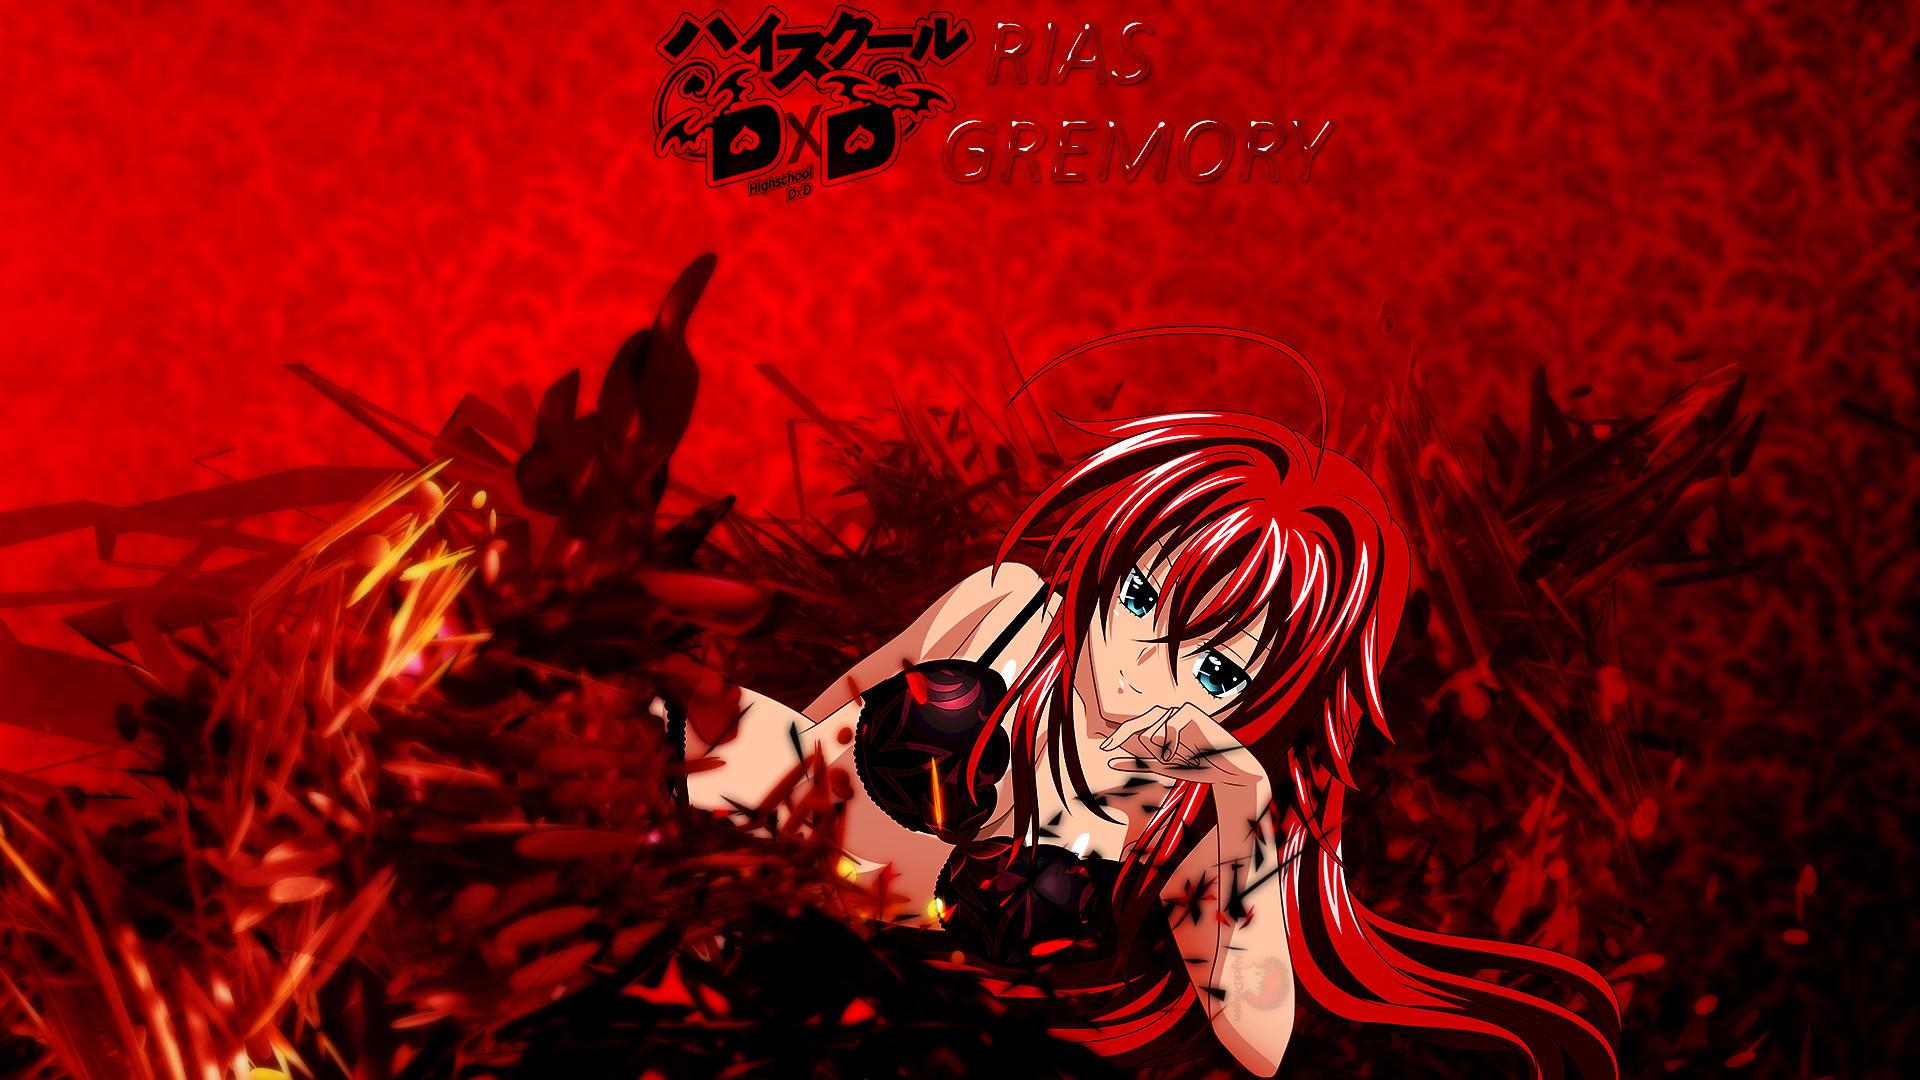 Highschool Dxd Background Rias Gremory Wallpaper 1920x1080 HD